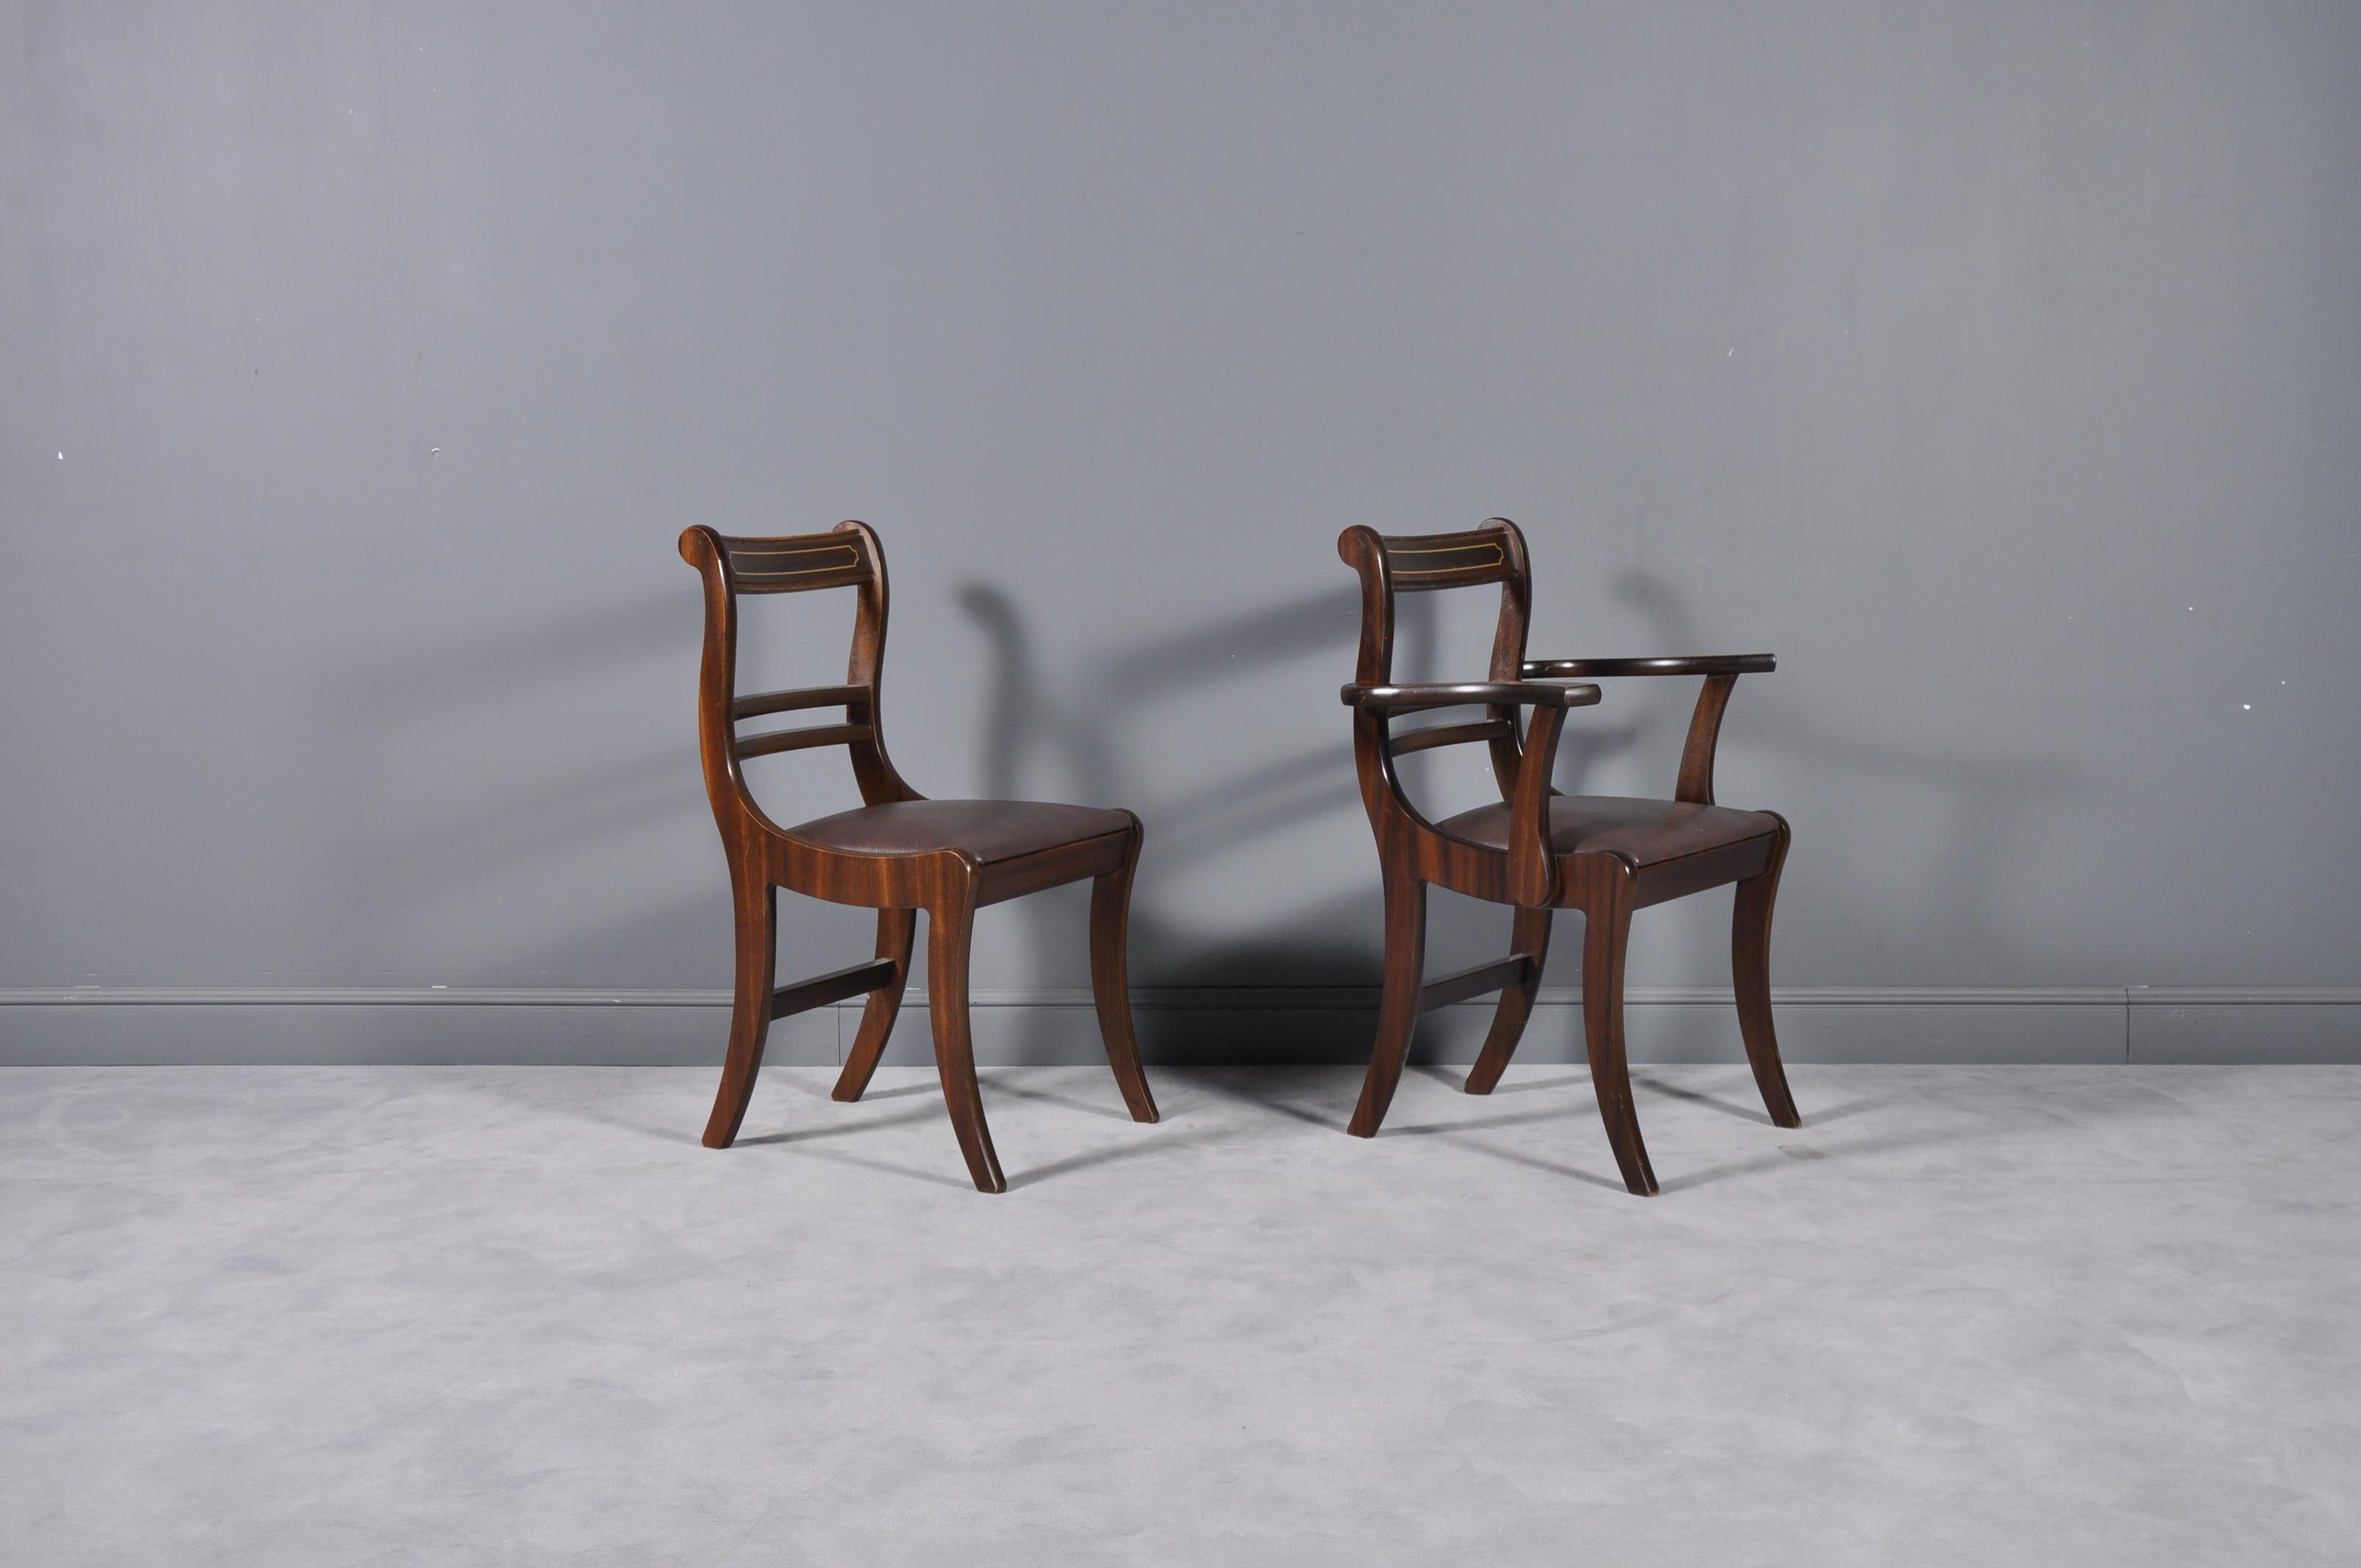 Set of Six 19th Century English Neoclassical Dining Chairs im Angebot 1